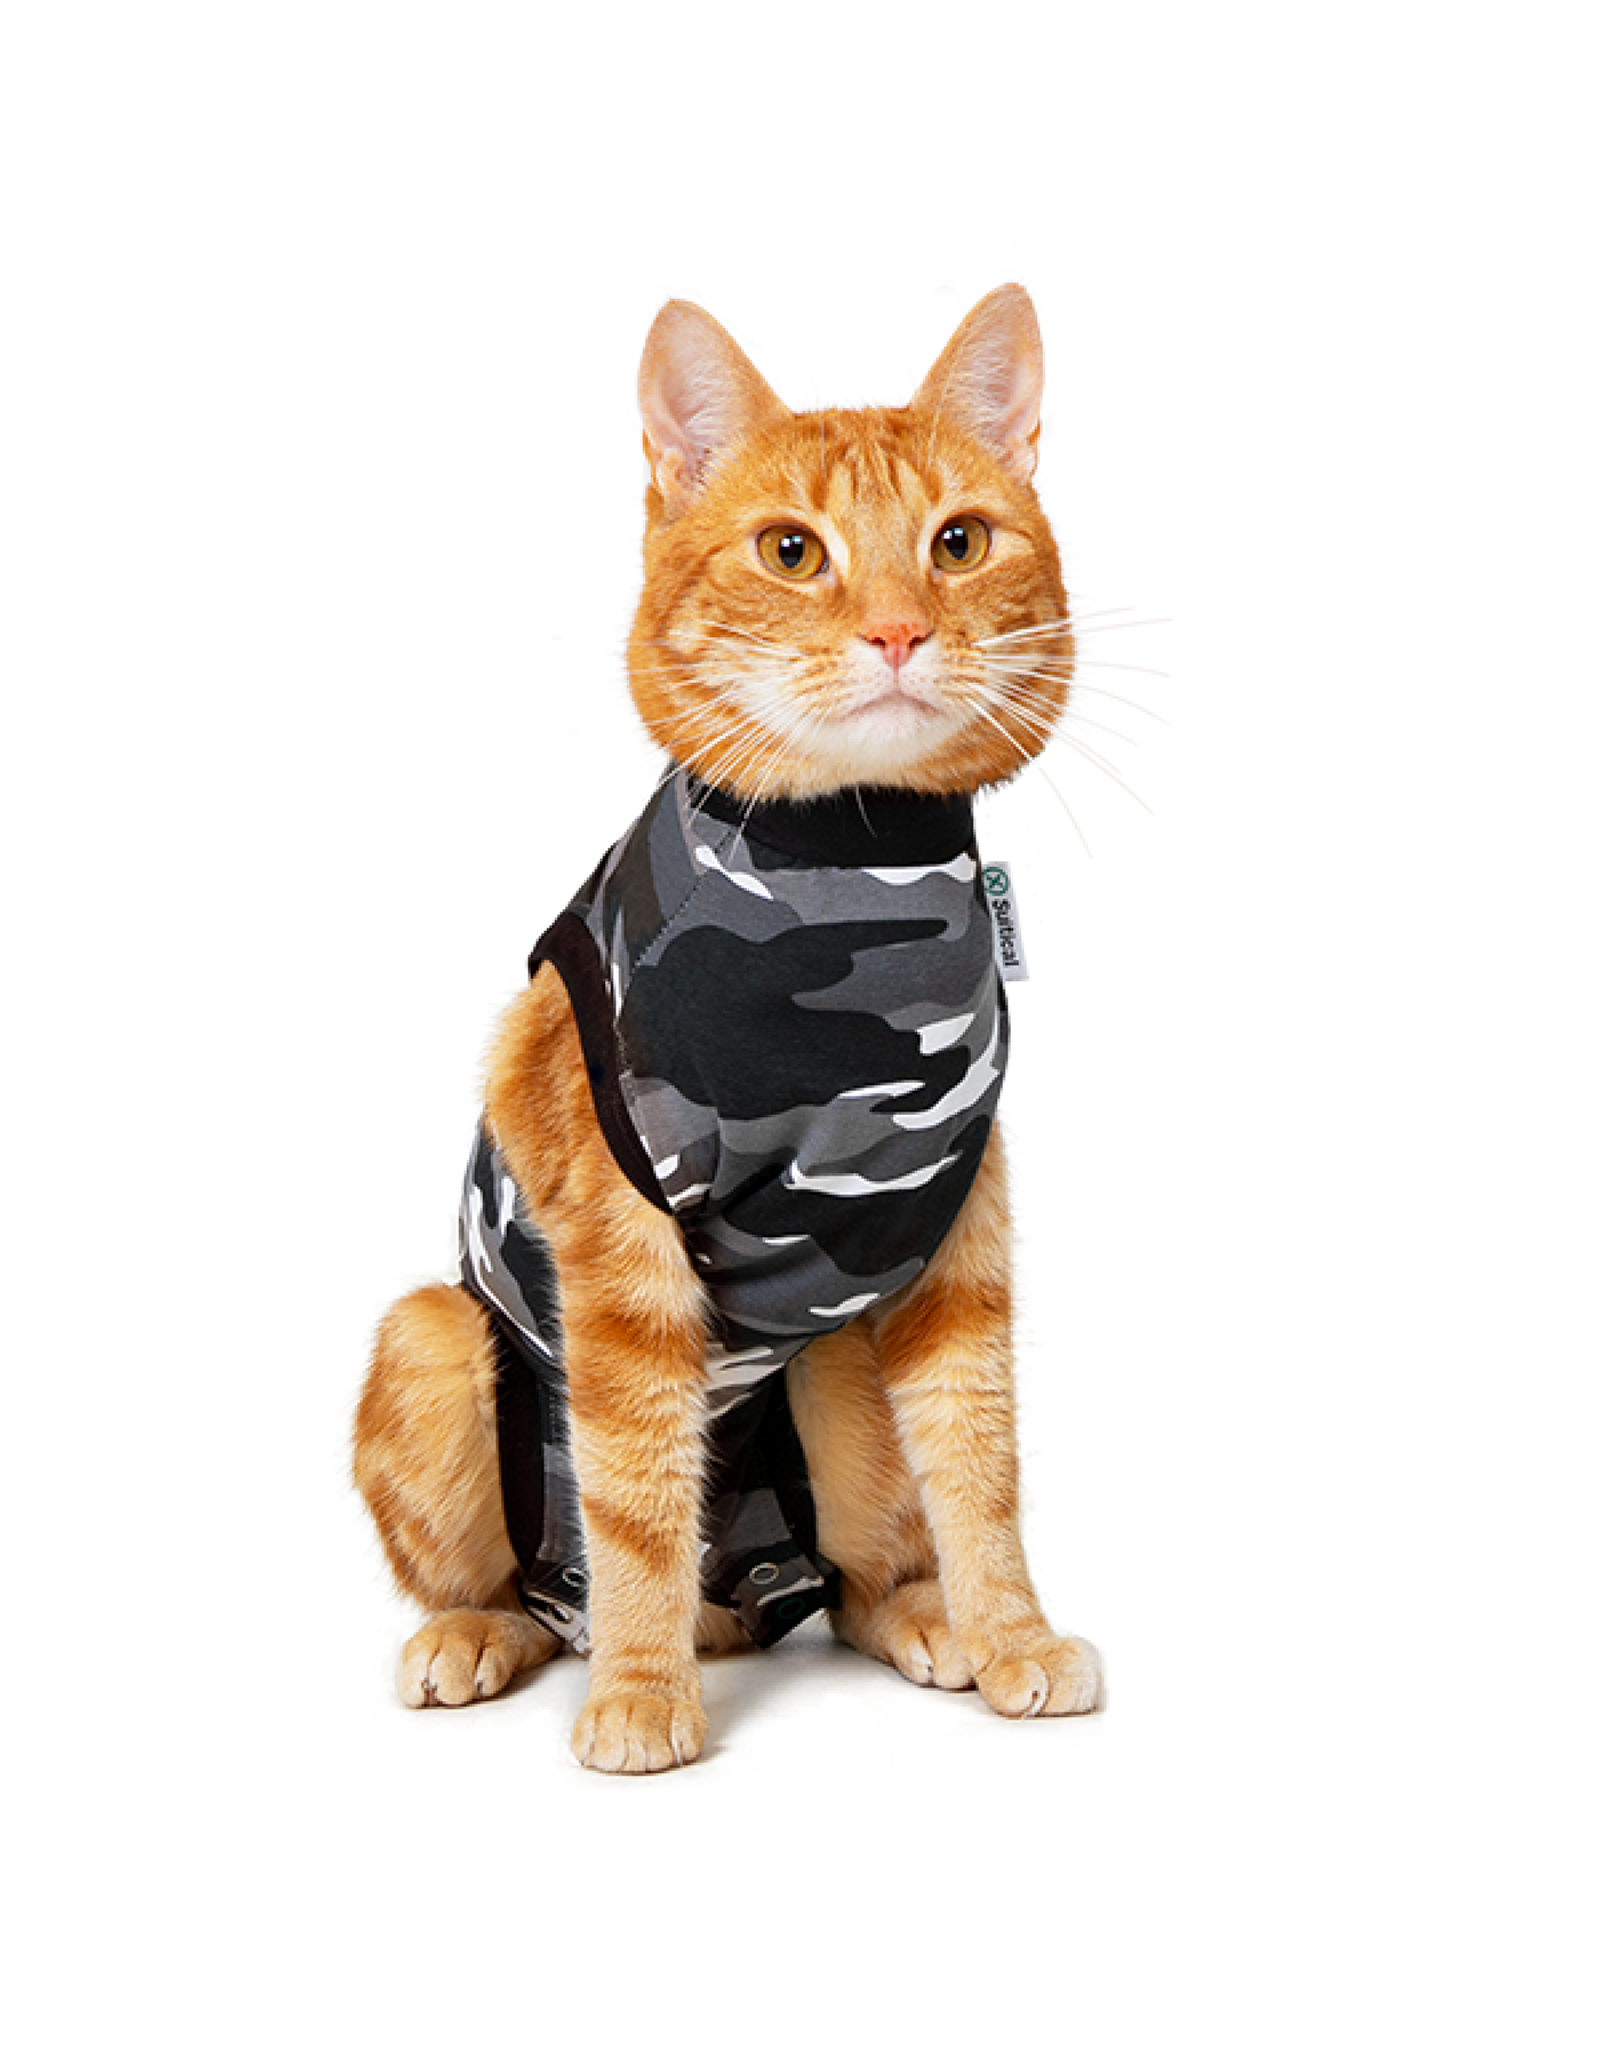 Suitical SUITICAL CAMOUFLAGE RECOVERY SUIT FOR CATS